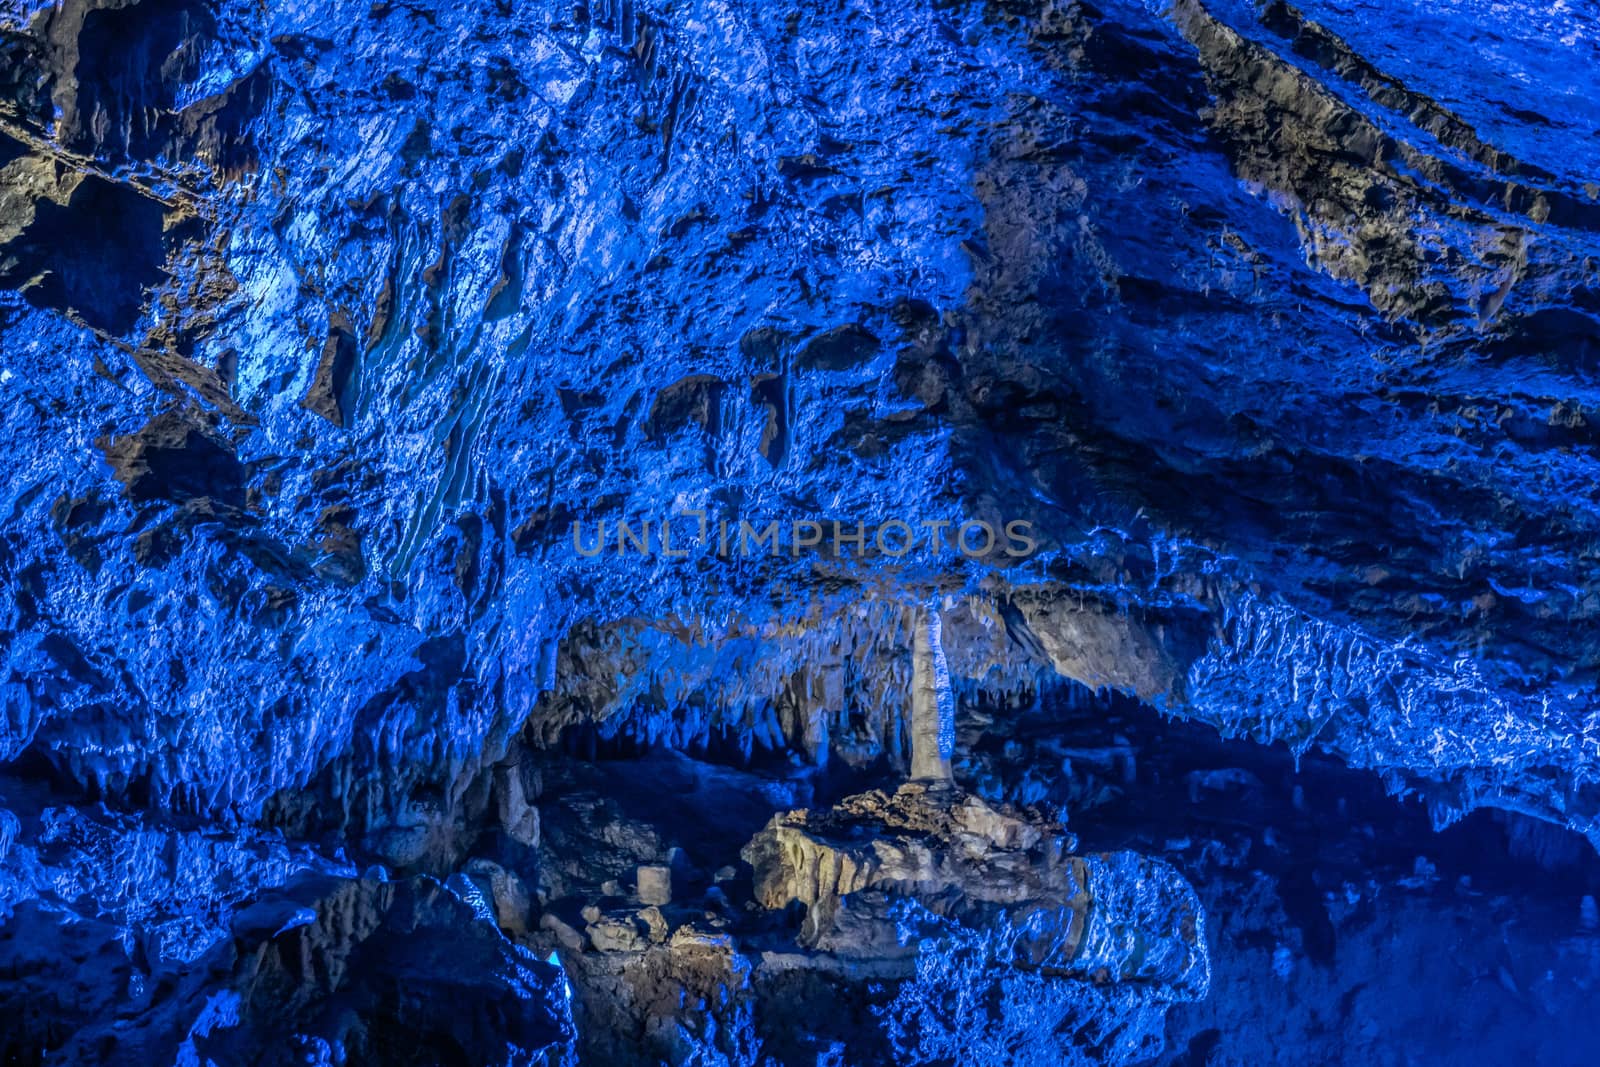 Han-sur-Lesse, Belgium - June 25, 2019: Grottes-de-Han 30 of 36. subterranean pictures of Stalagmites and stalactites in different shapes and colors throughout tunnels, caverns and large halls.. Lightshow.